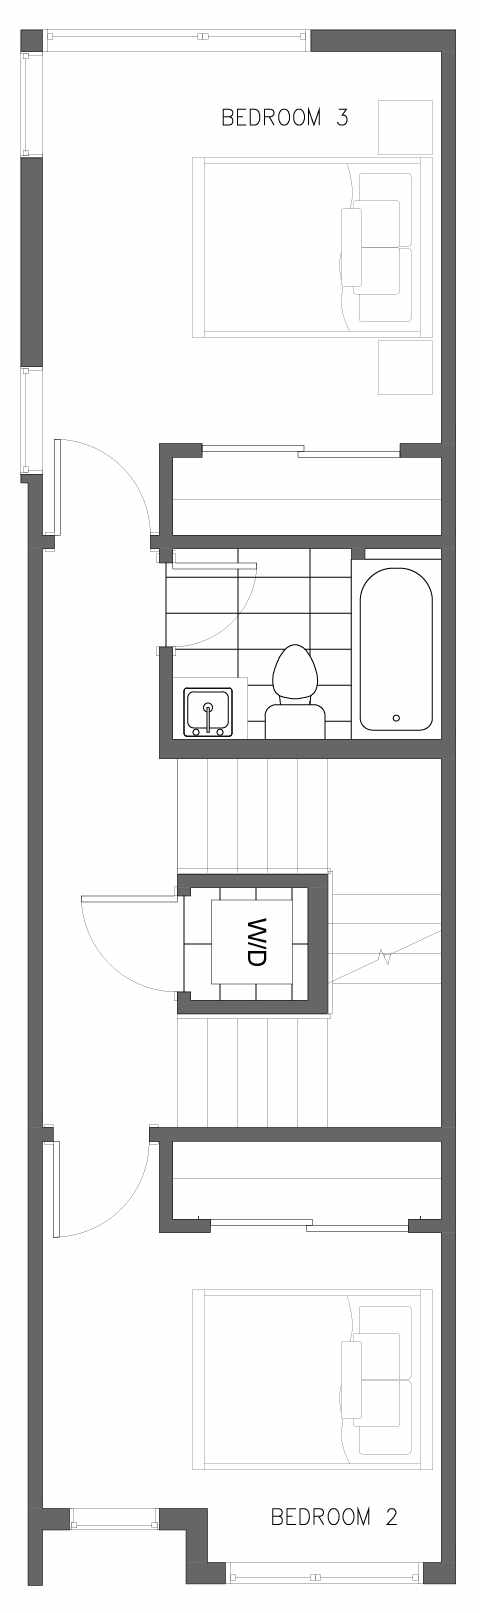 Second Floor Plan of 5612 NE 60th St., One of the Kendal Townhomes in Windermere by Isola Homes